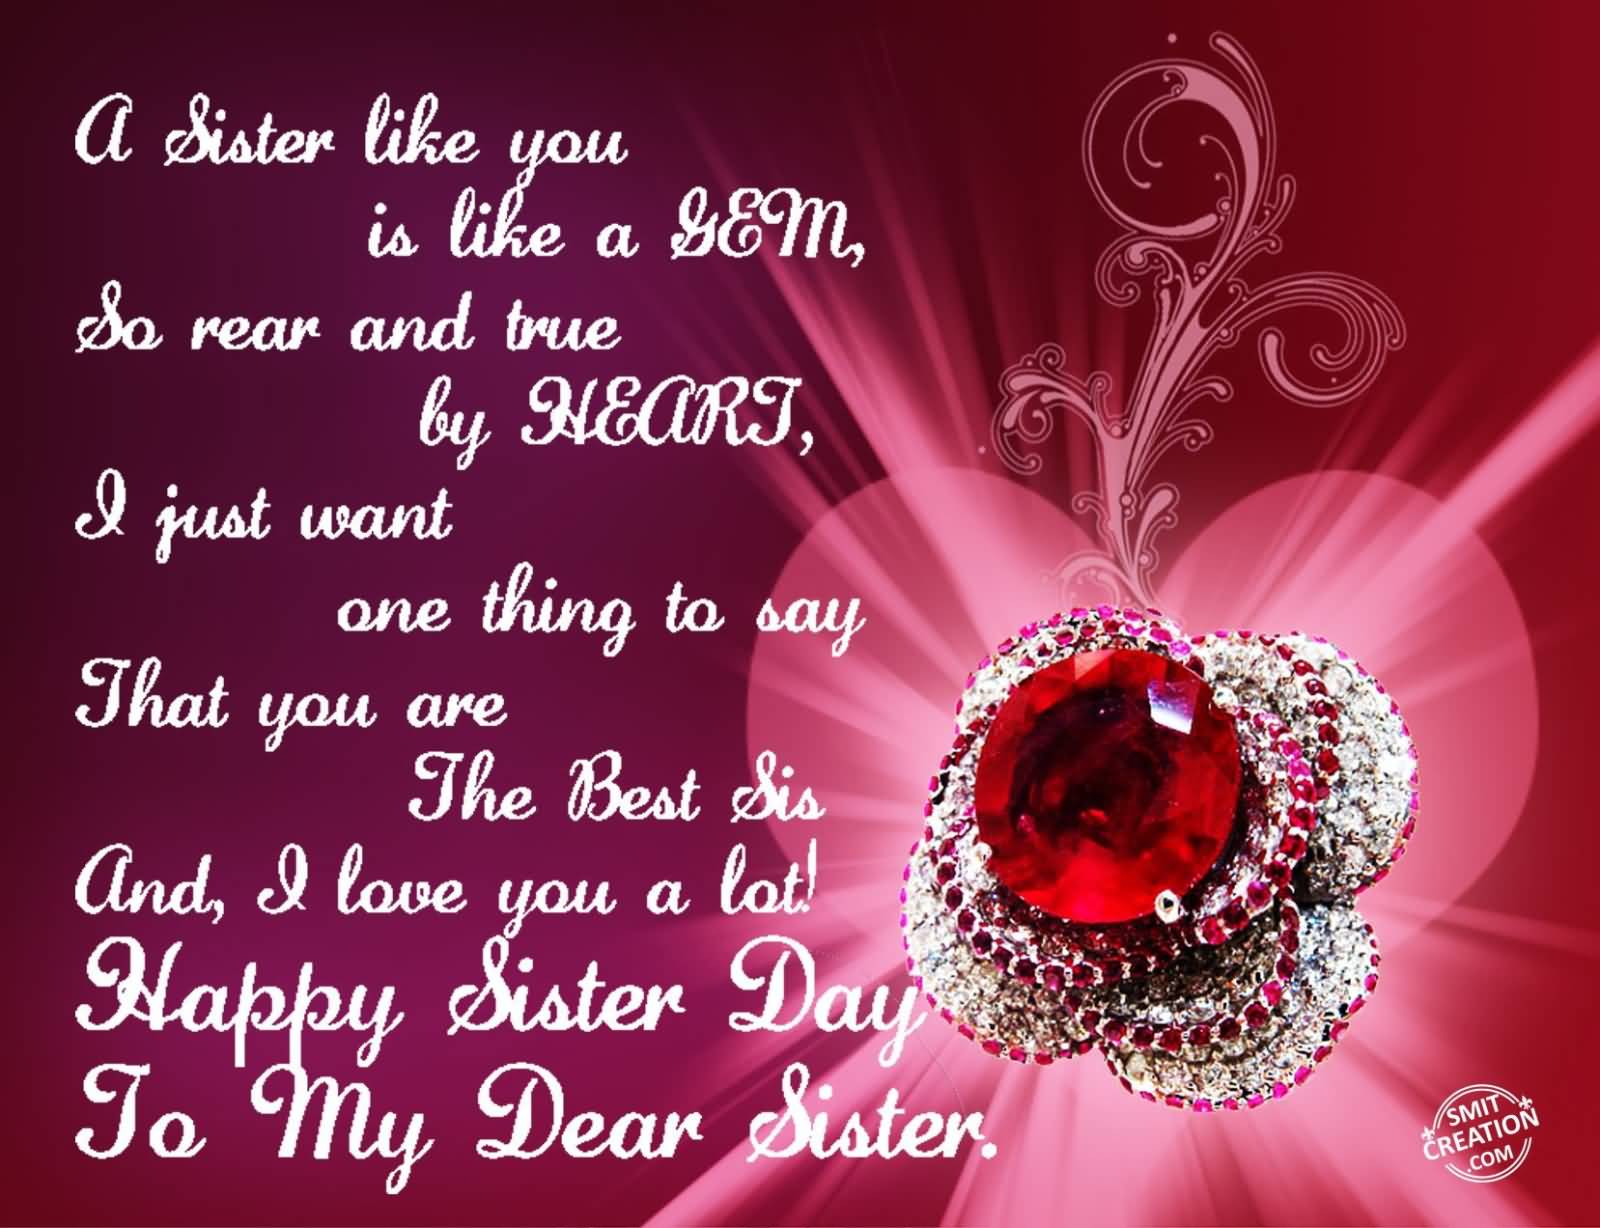 Happy Sister Day To My Dear Sister